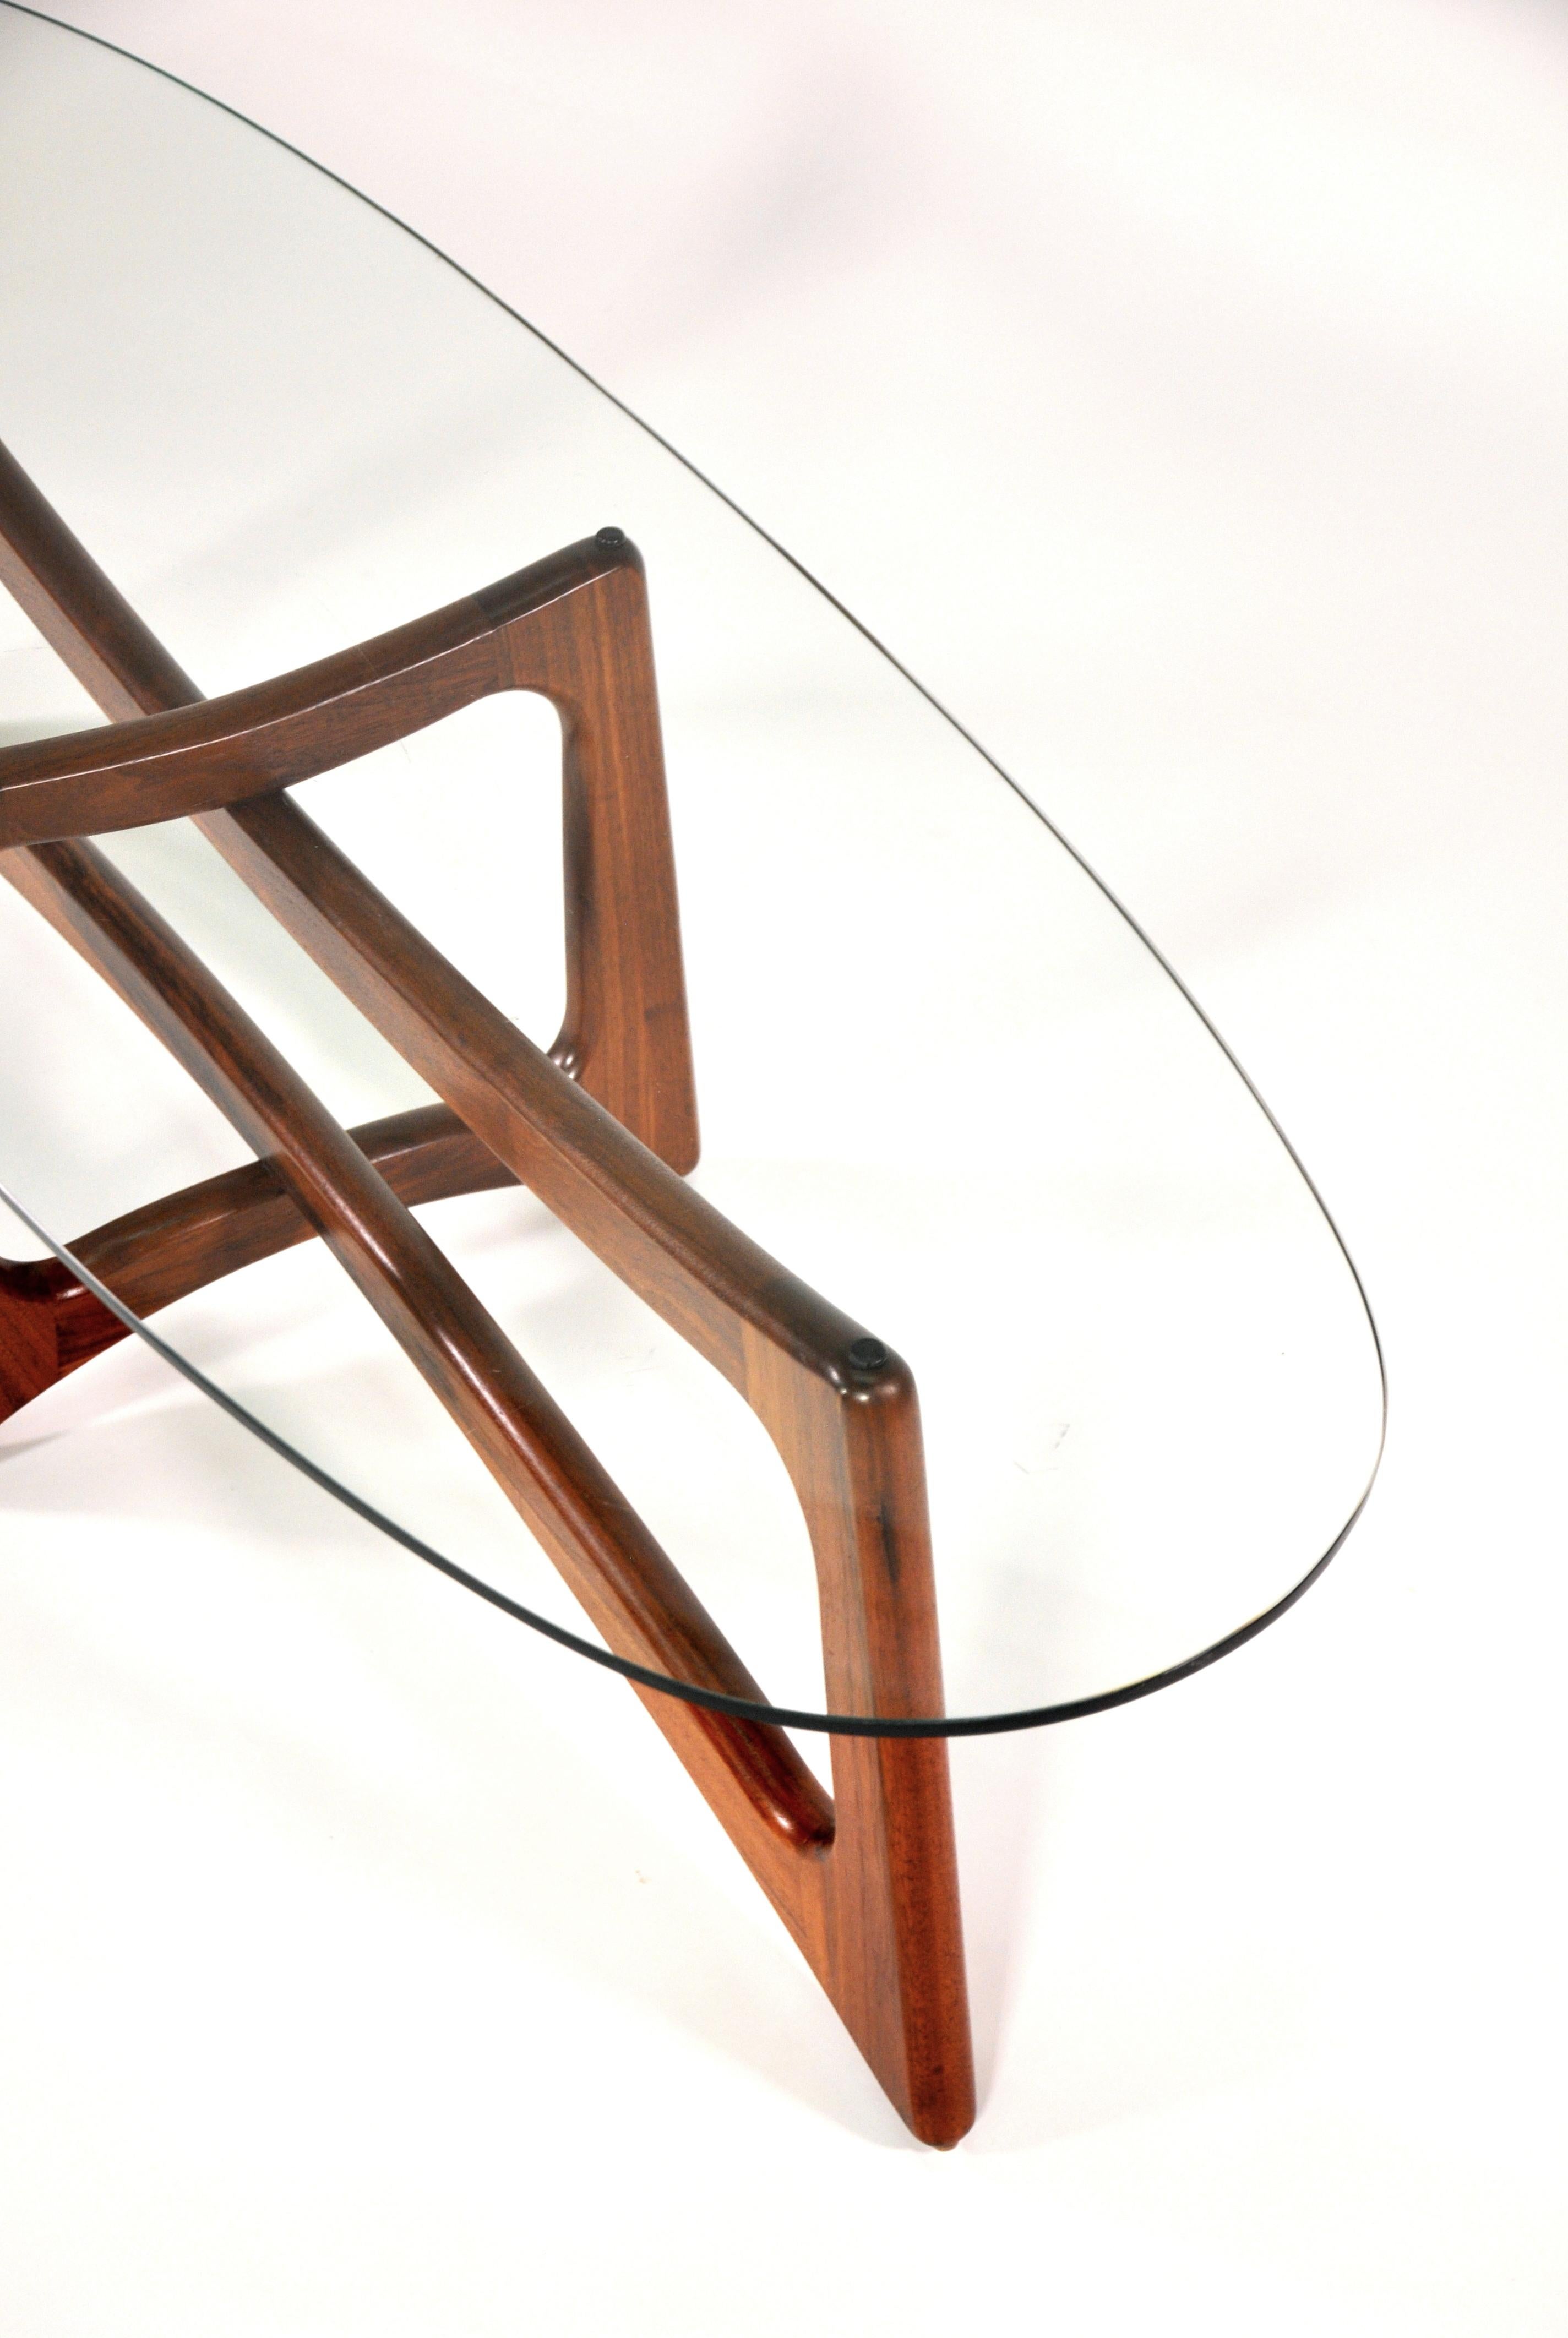 Iconic Mid-Century Modern sculptural walnut and glass cocktail table, model 2454-TGO, designed by Adrian Pearsall for Craft Associates, Inc. in the 1960s. The interlocking solid walnut base is topped by an oval glass. The sculptured wood is richly